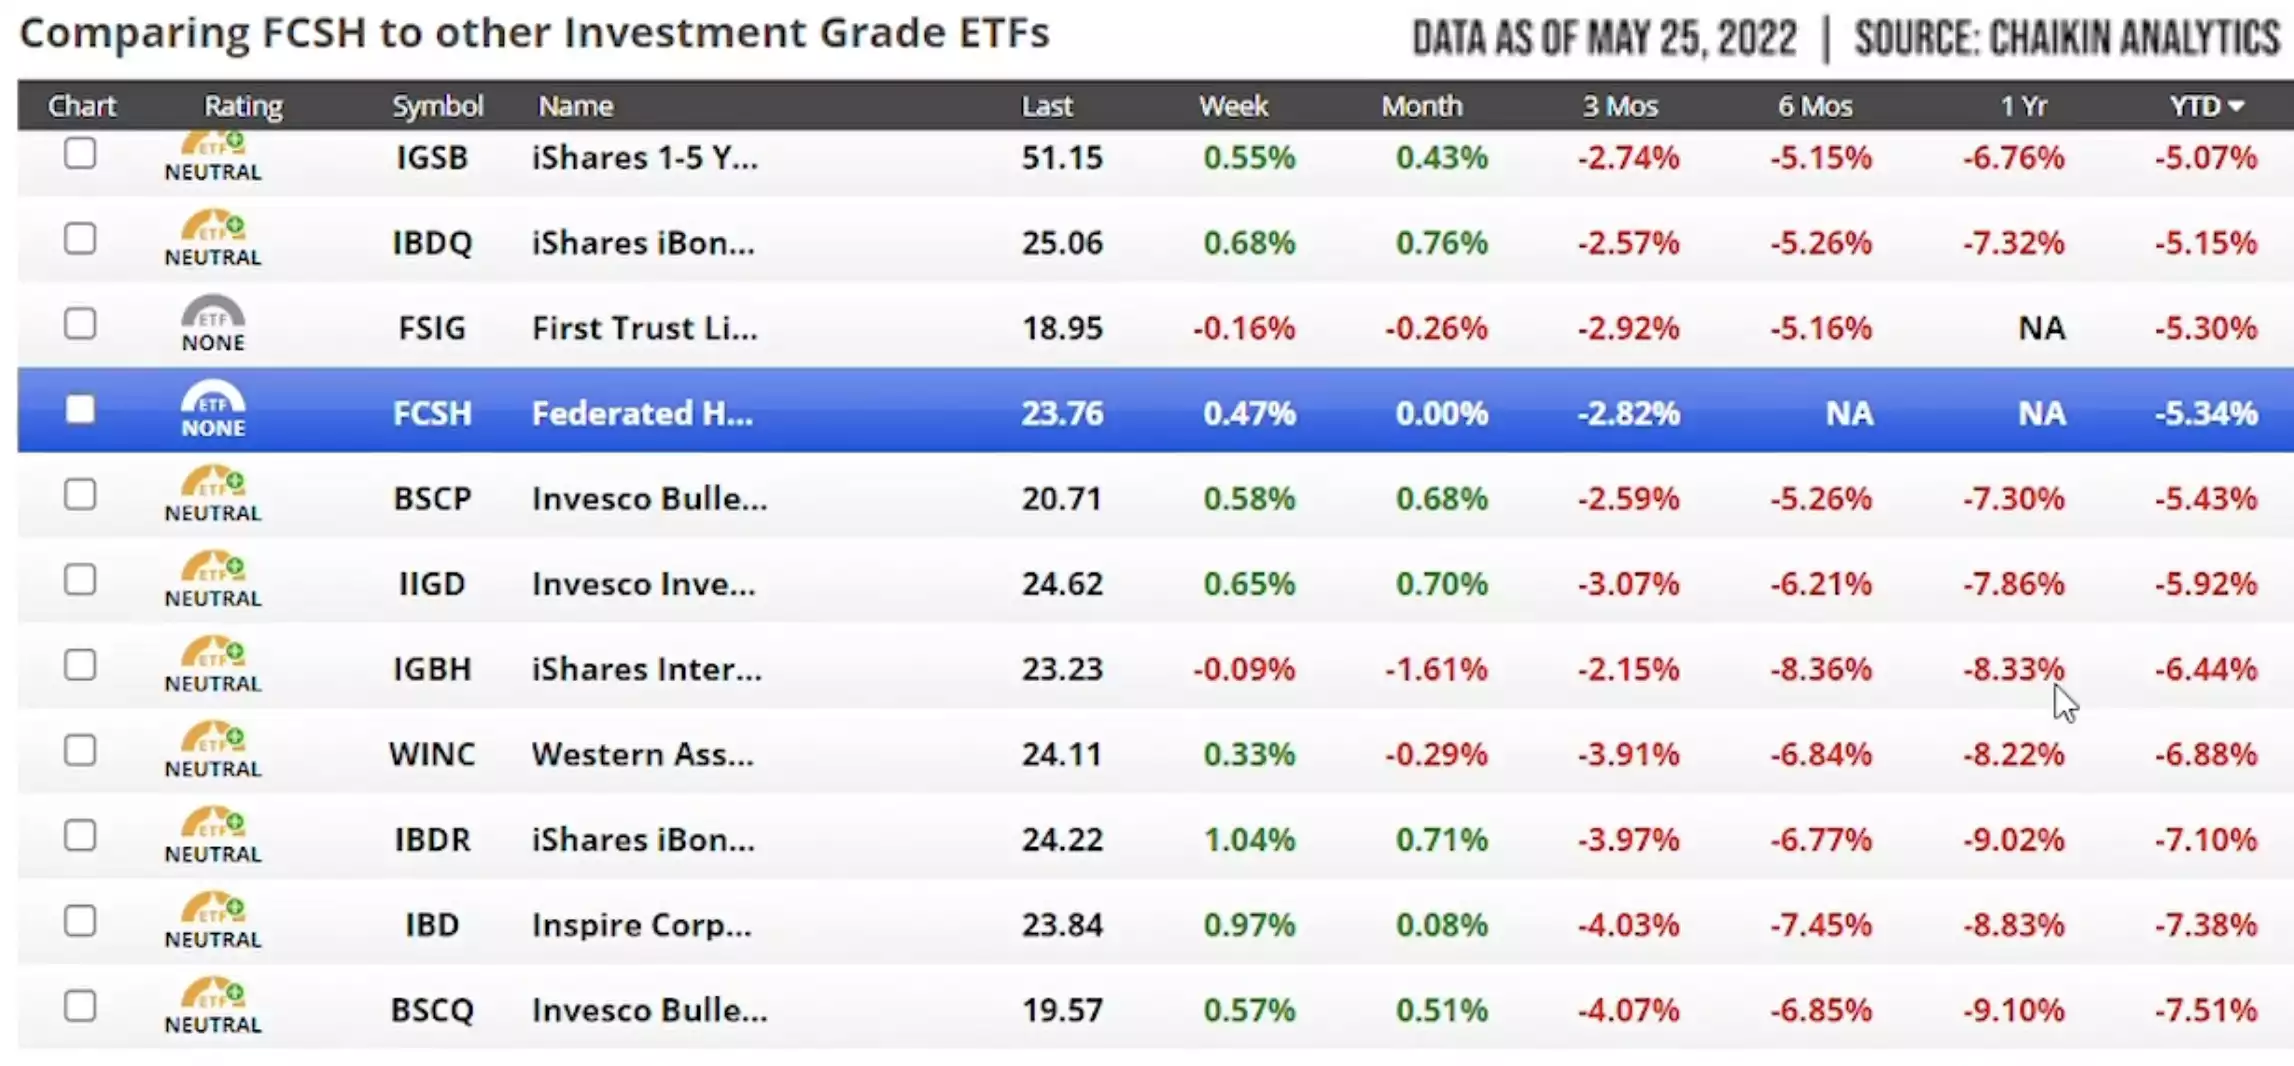 Halftime Report - Comparing FCSH to Other Investment Grade ETFs_2